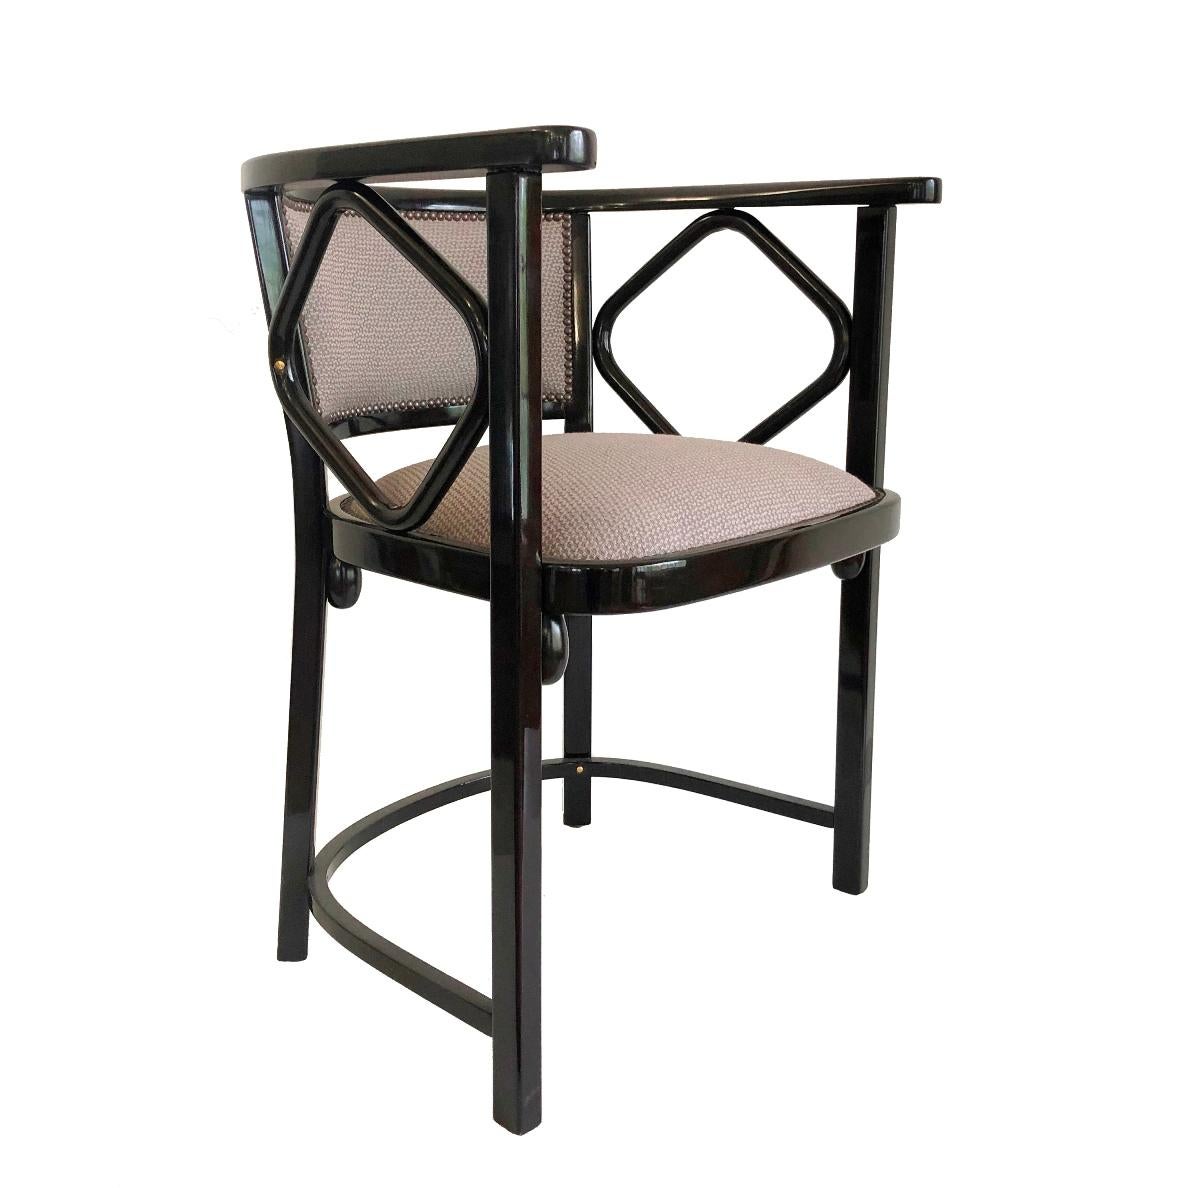 12 Josef Hoffmann Attributed Thonet Bentwood Fledermaus Chairs, Austria, 1930s For Sale 11